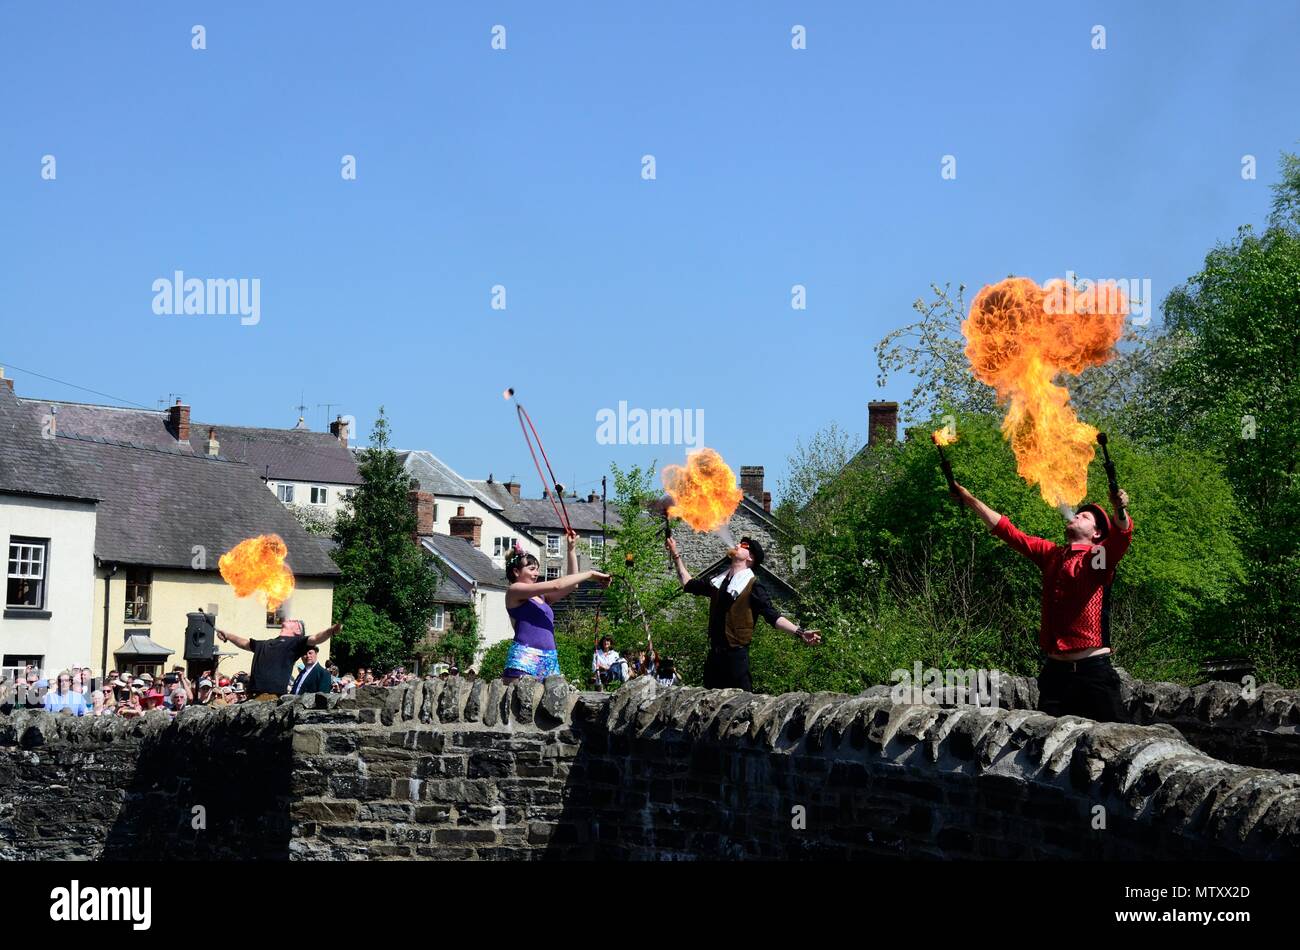 Fire eaters entertaining crouds on Clun medieval bridge at the Clun Green man Festival Shropshire England Stock Photo